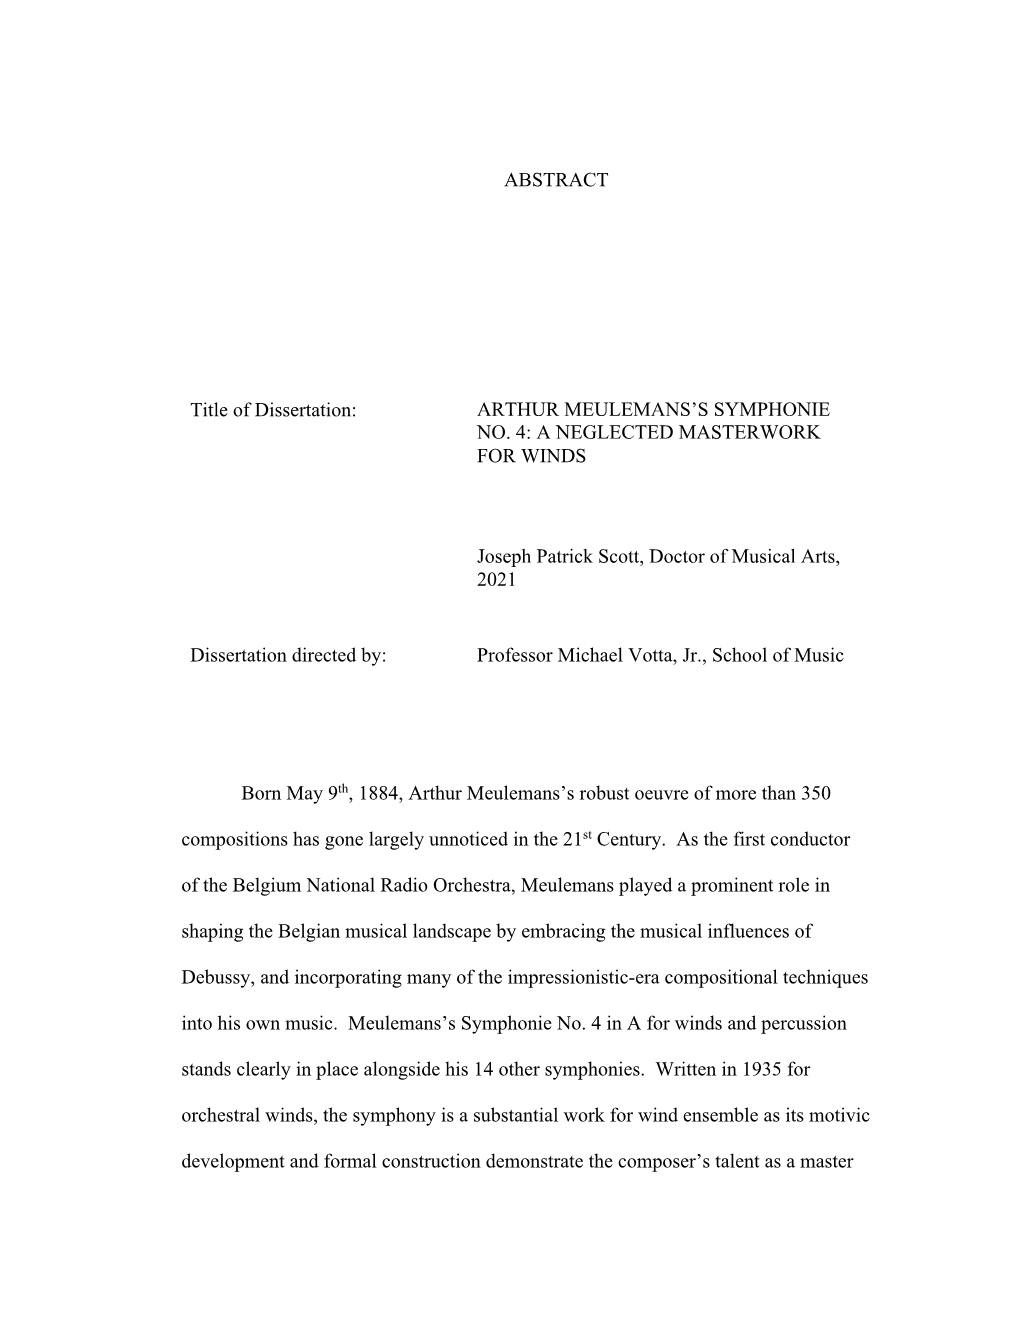 ABSTRACT Title of Dissertation: ARTHUR MEULEMANS's